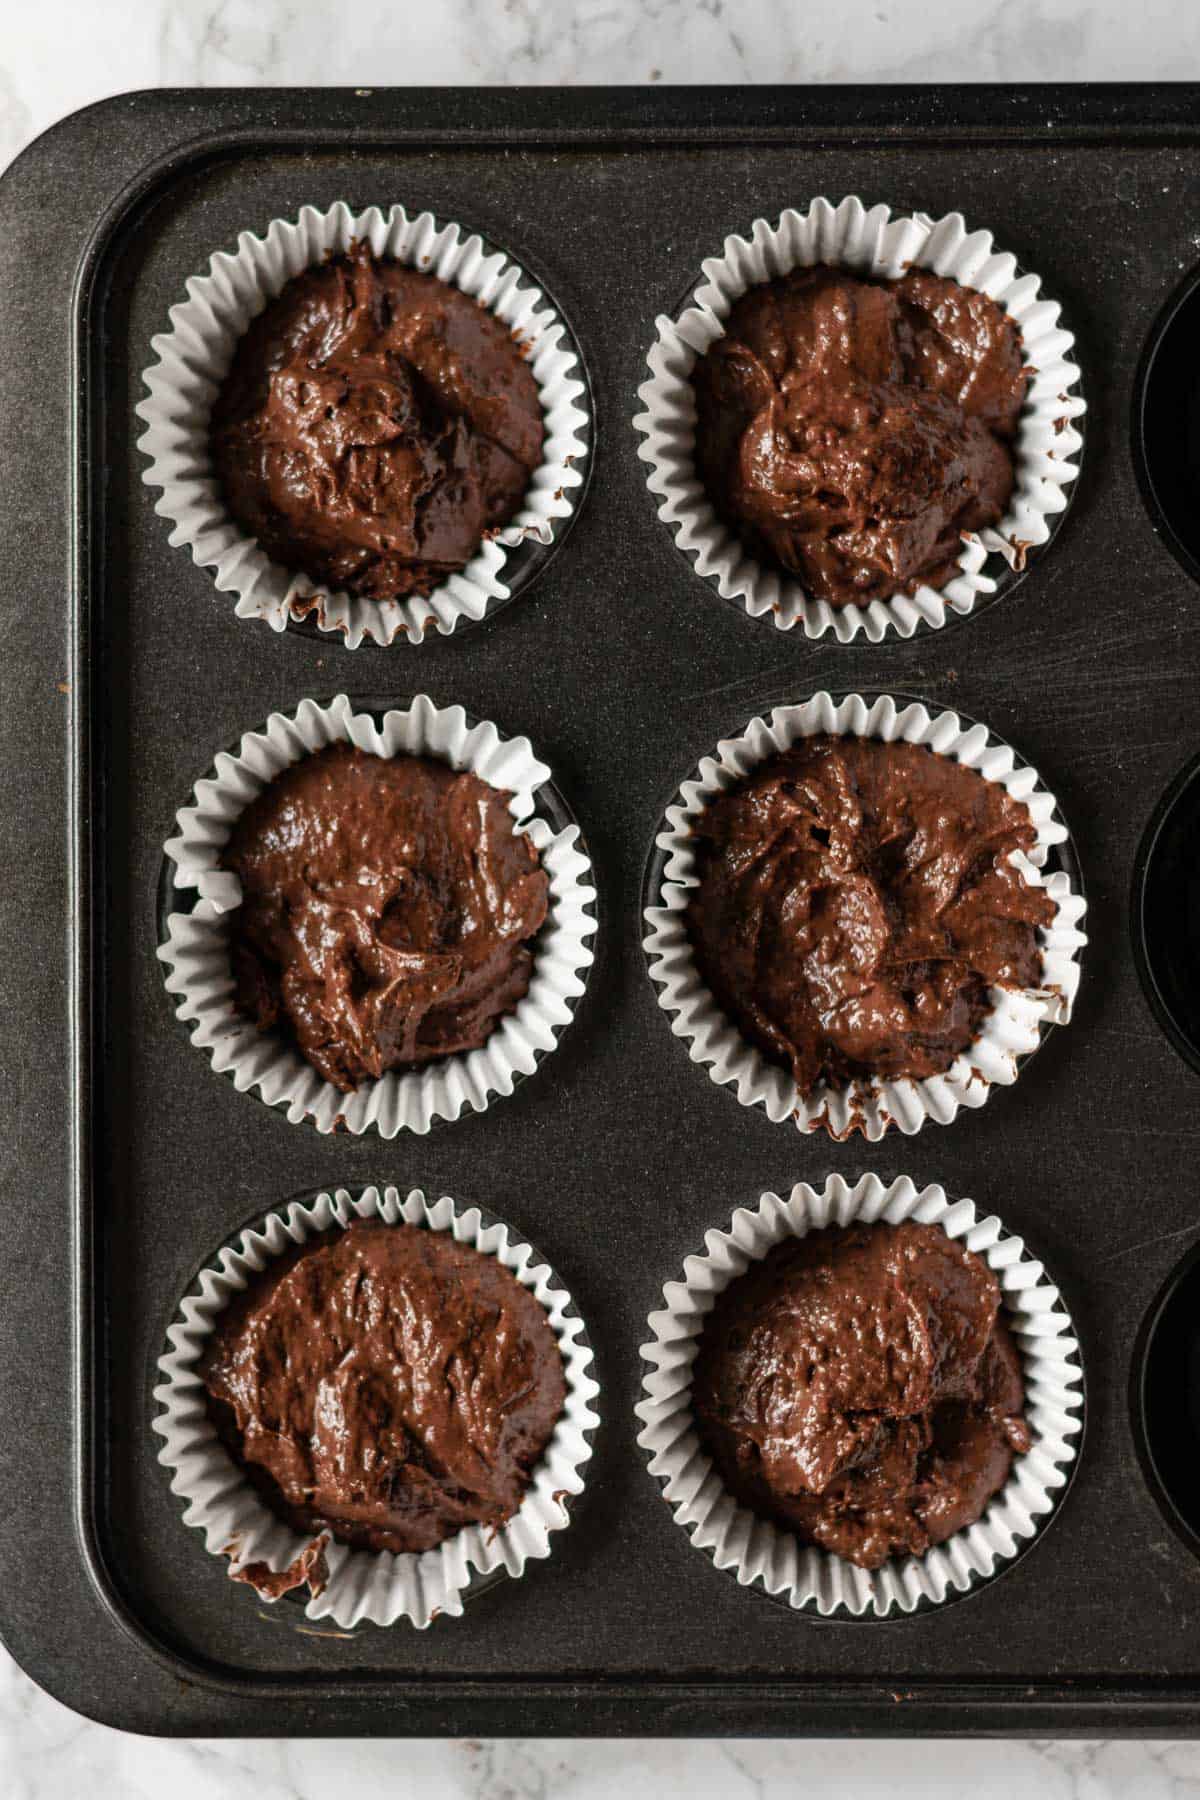 cupcake cases filled with chocolate batter